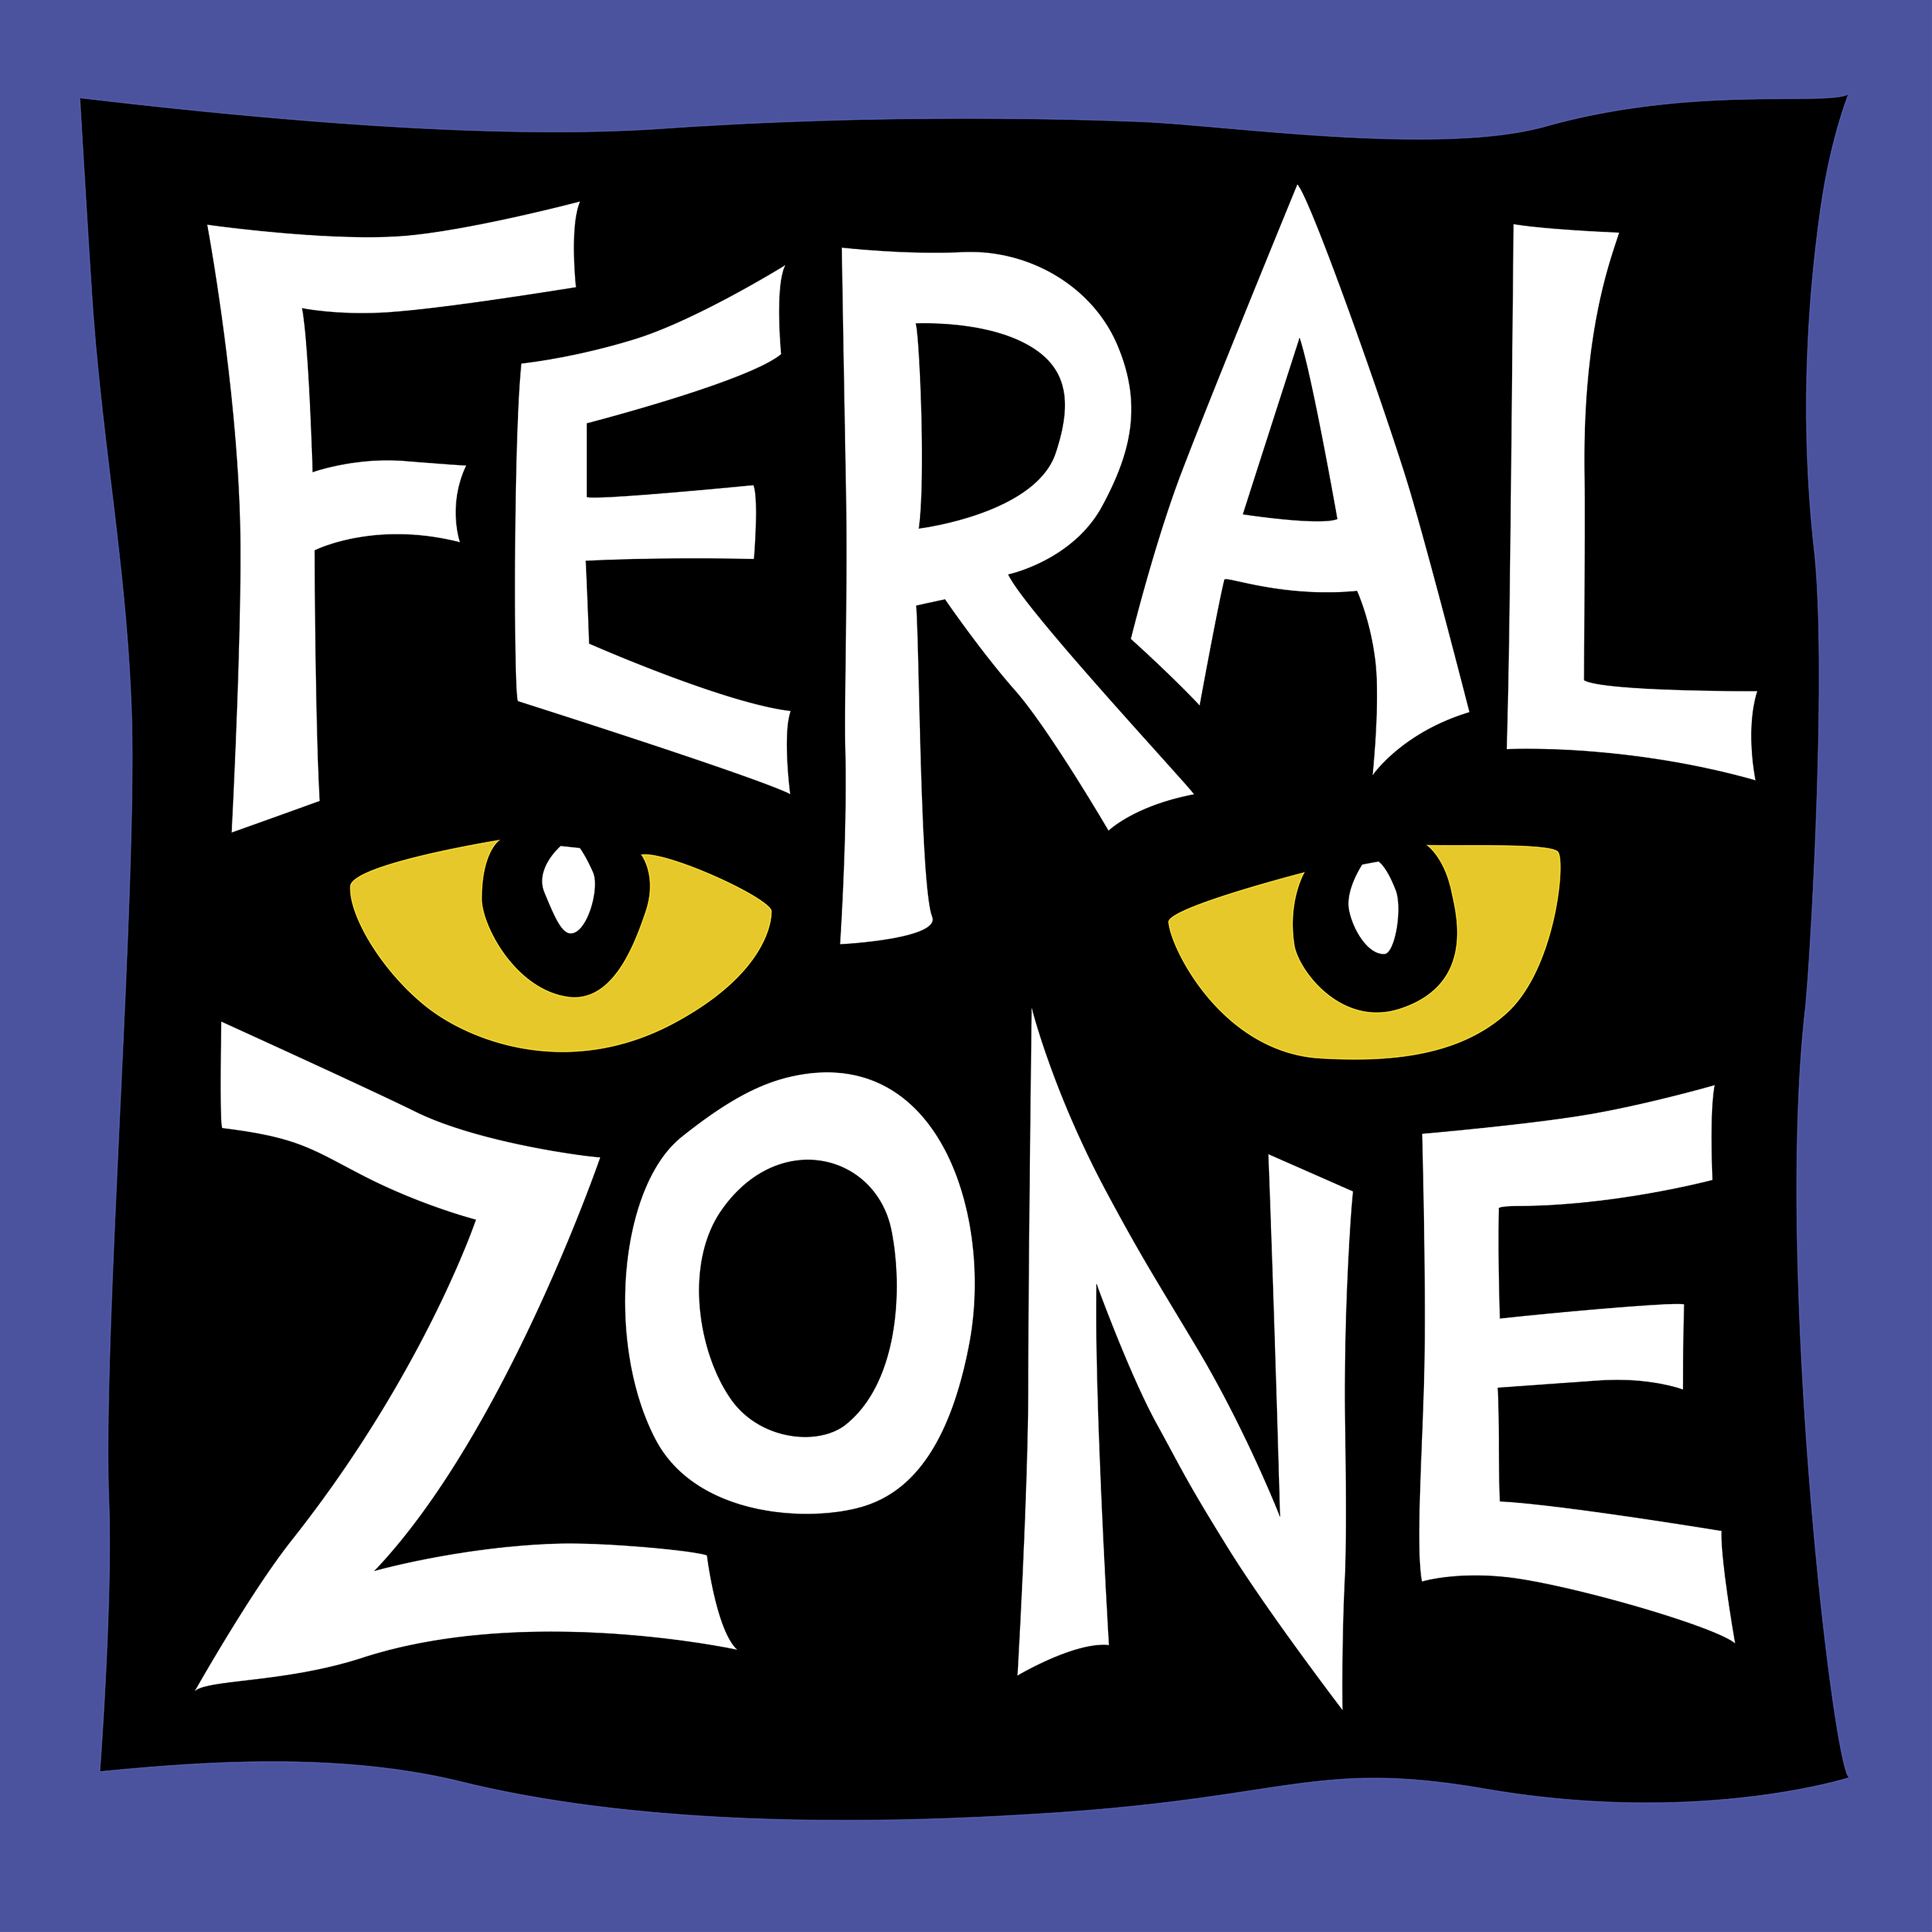 Feral Zone 7 ANTHONY CUCCIA: THE NIGHT JANITOR CLEANS UP 